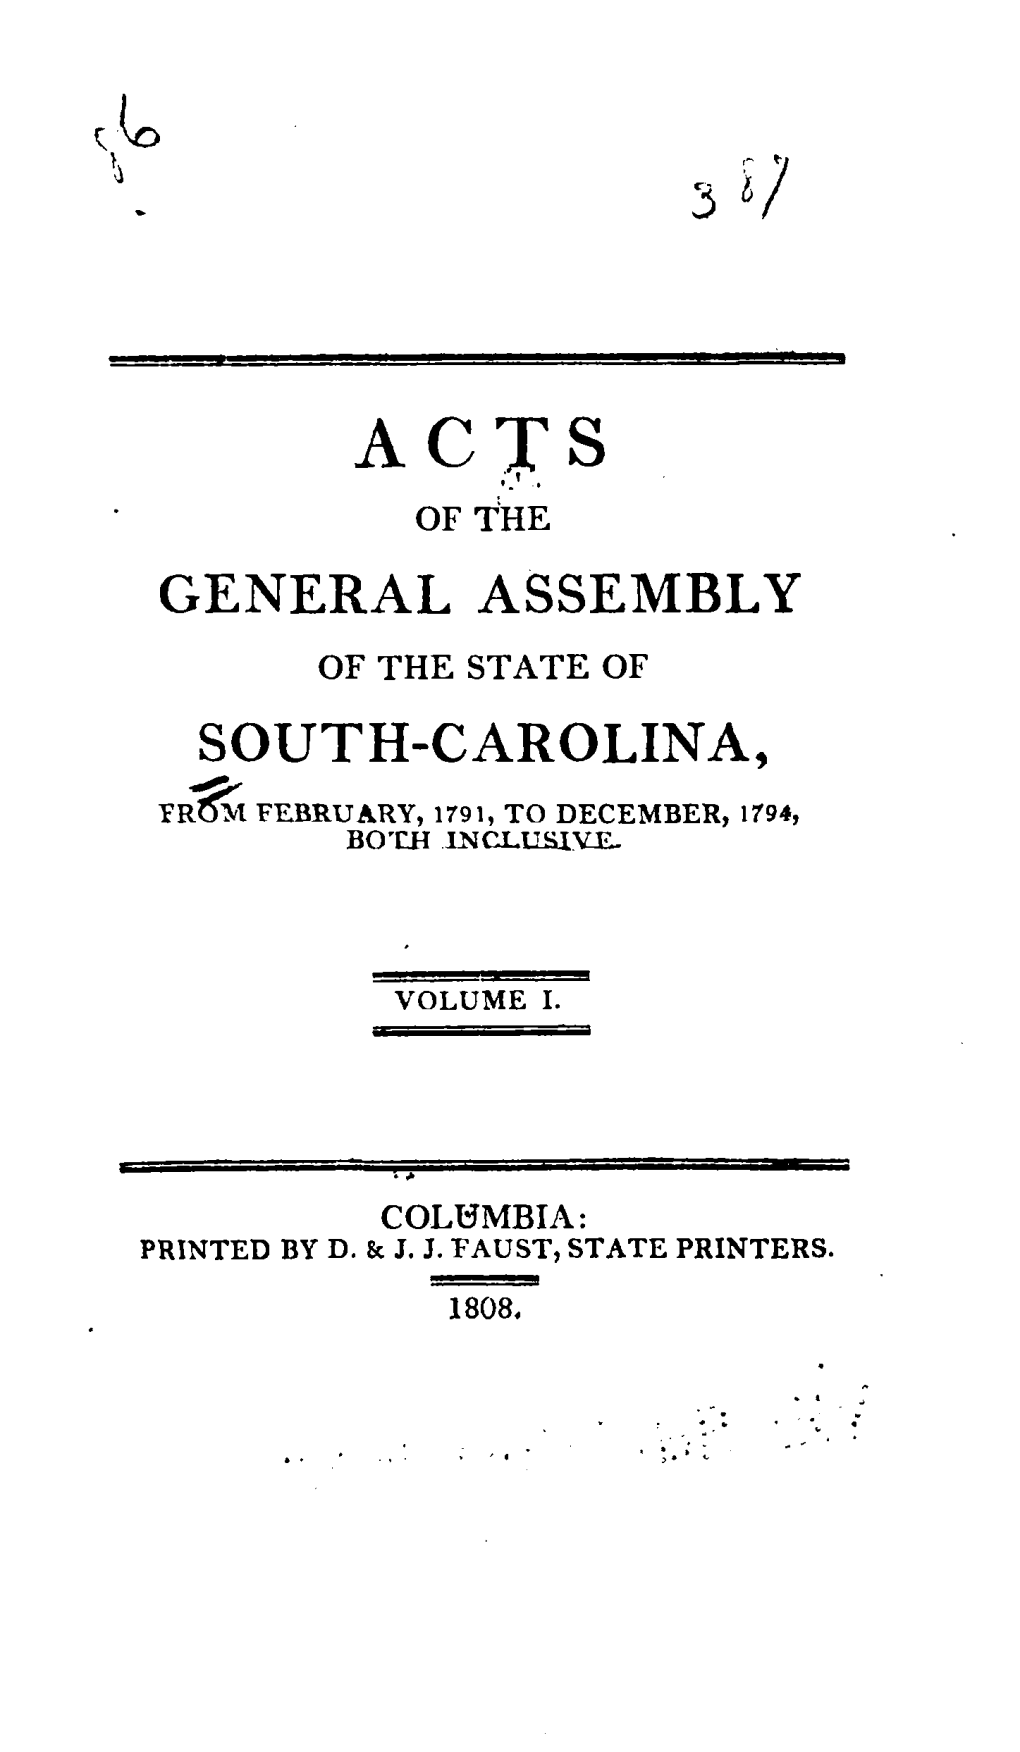 Acts of the General Assembly 1791-1794